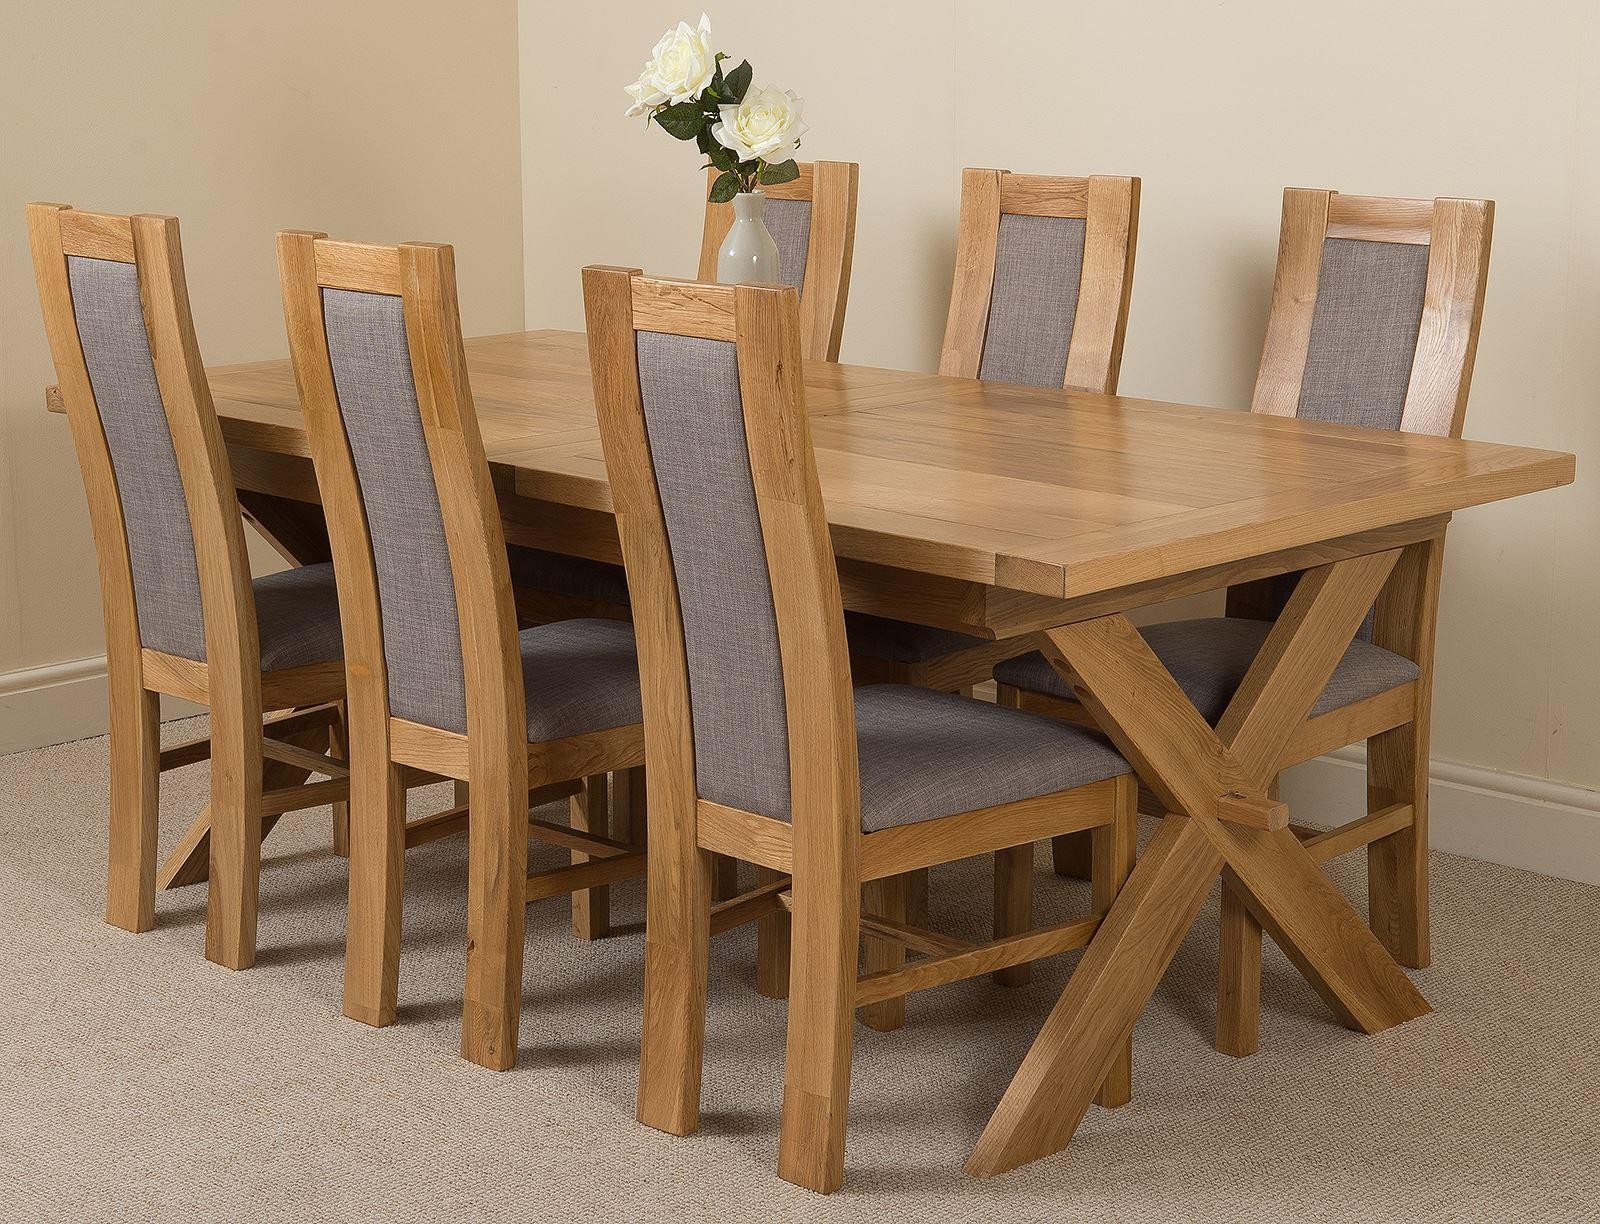 Vermont Solid Oak 200cm-240cm Crossed Leg Extending Dining Table with 6